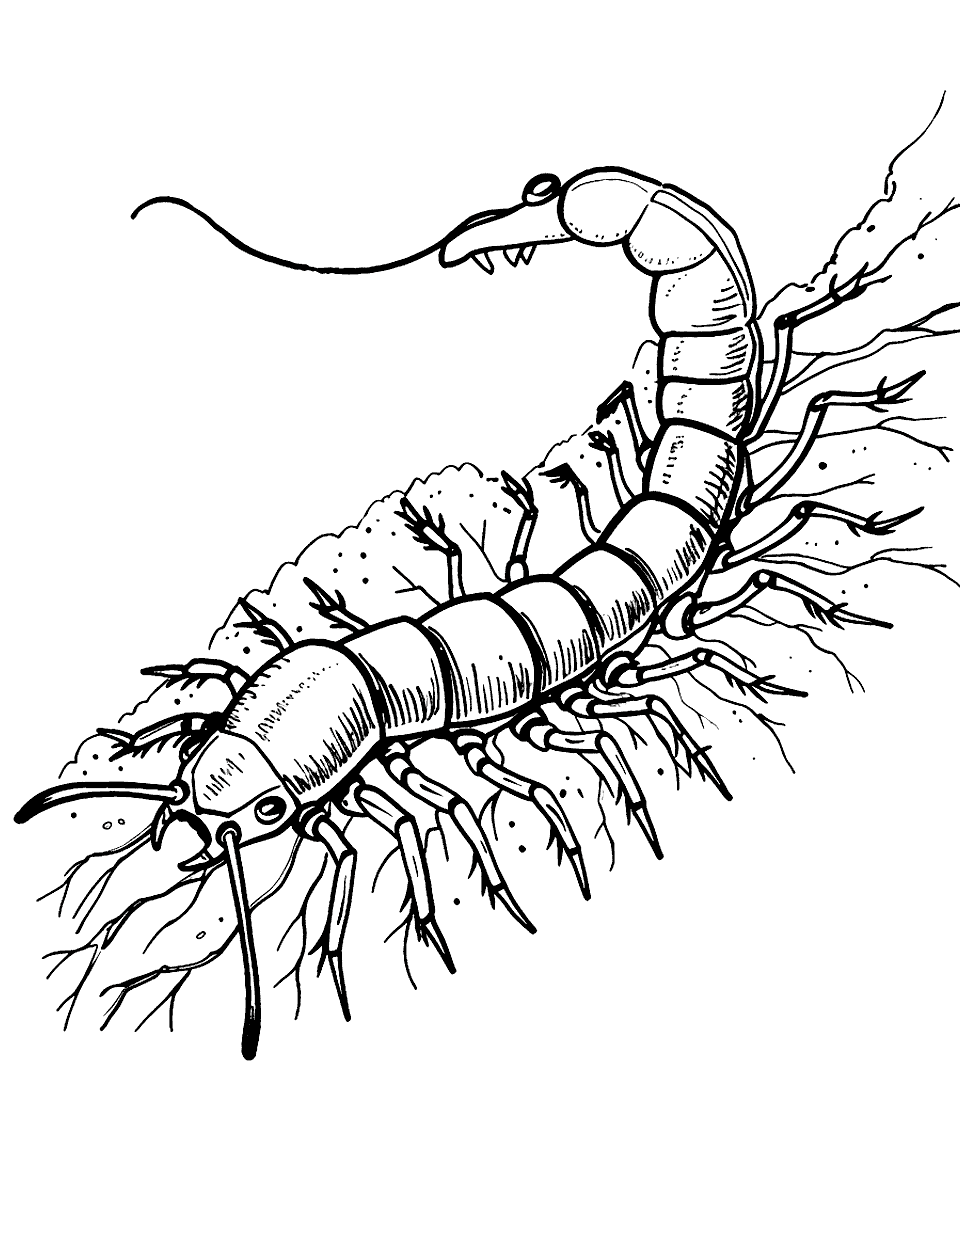 Centipede Exploring the Soil Insect Coloring Page - A centipede making its way through rich soil filled with roots.